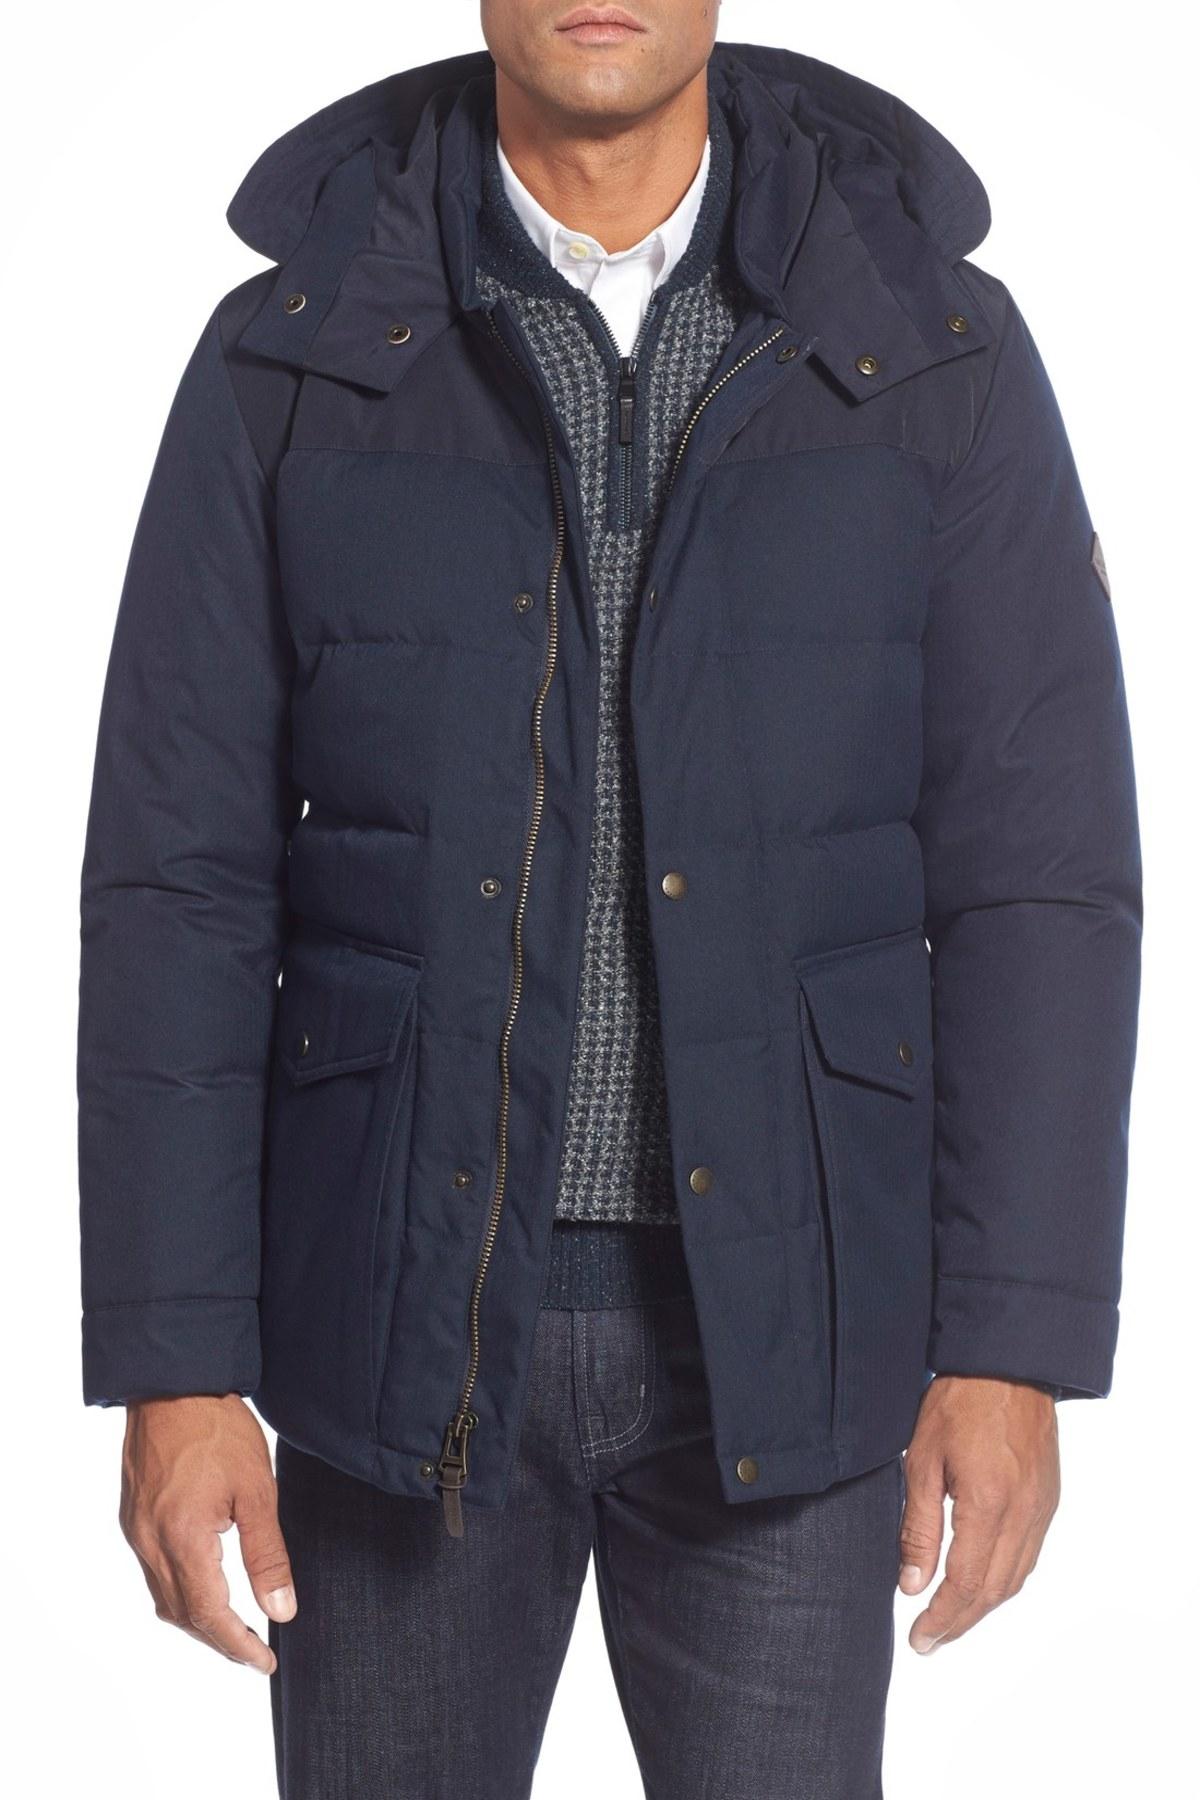 Cole Haan Synthetic Quilted Down Parka in Navy (Blue) for Men - Lyst